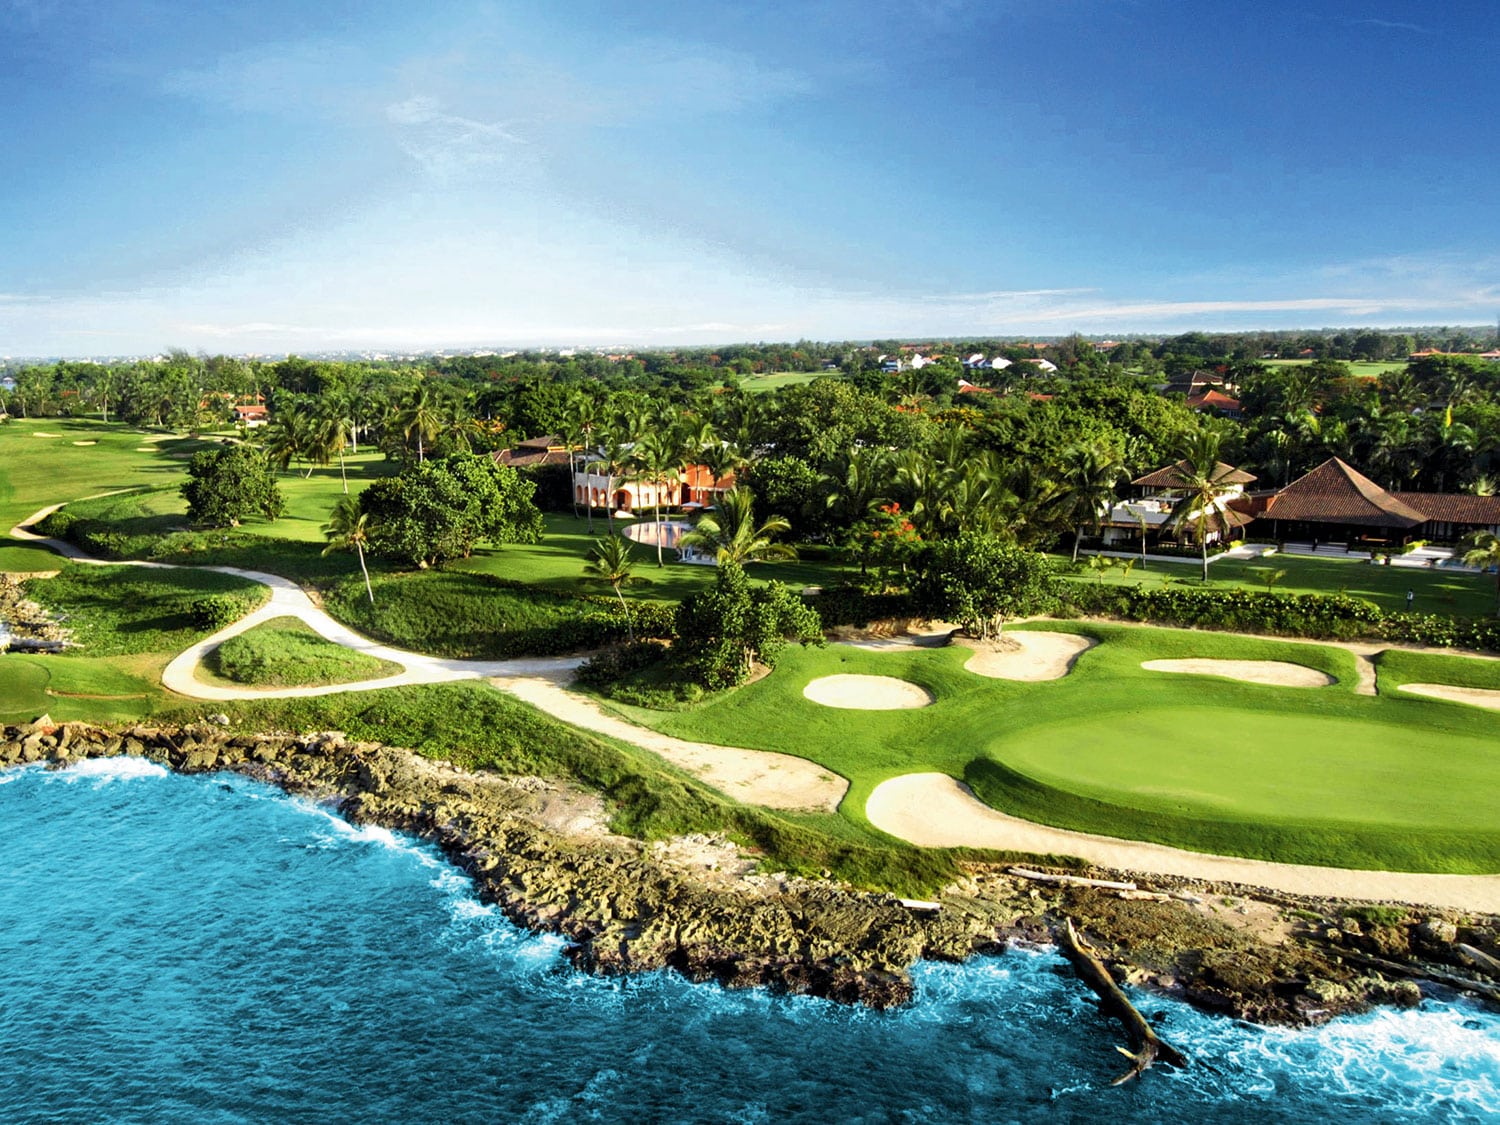 The Teeth of the Dog golf course at Casa de Campo Resort and Villas in the Dominican Republic.